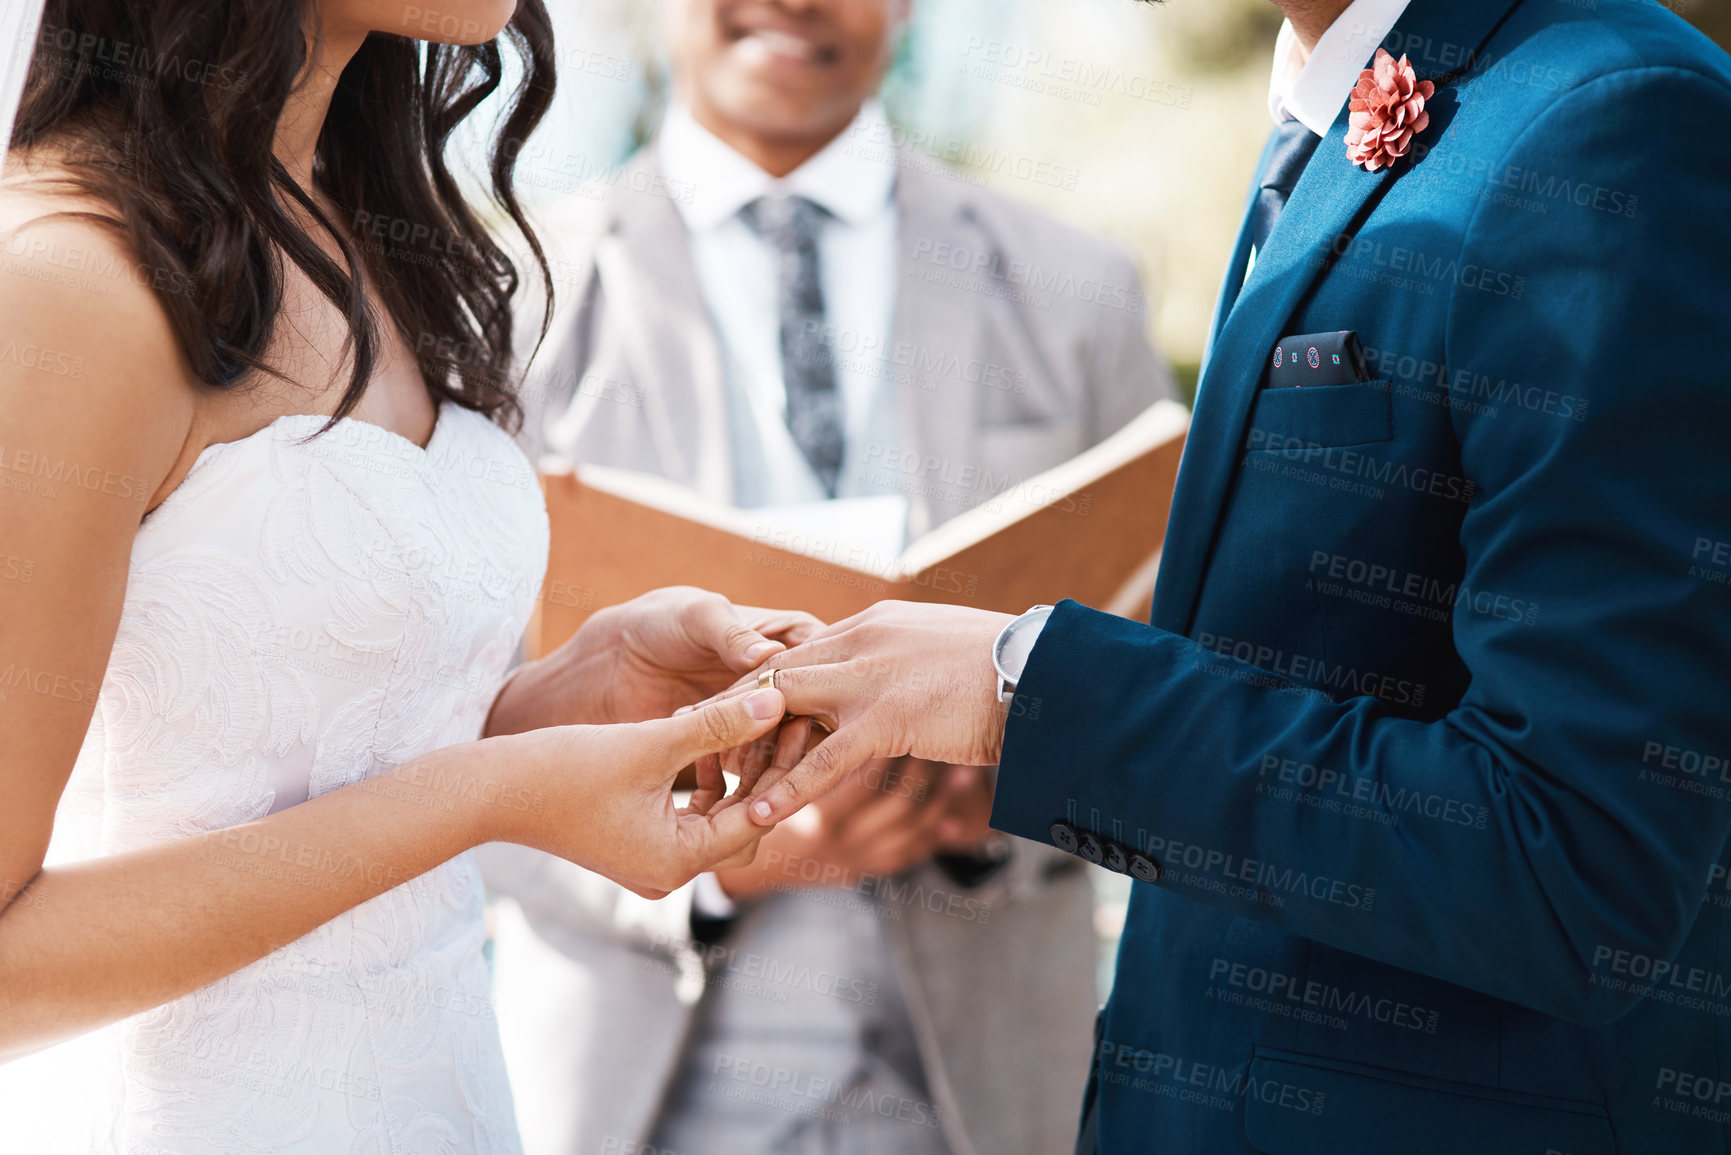 Buy stock photo Cropped shot of an unrecognizable bride slipping a ring on to her groom's finger while standing at the altar on their wedding day